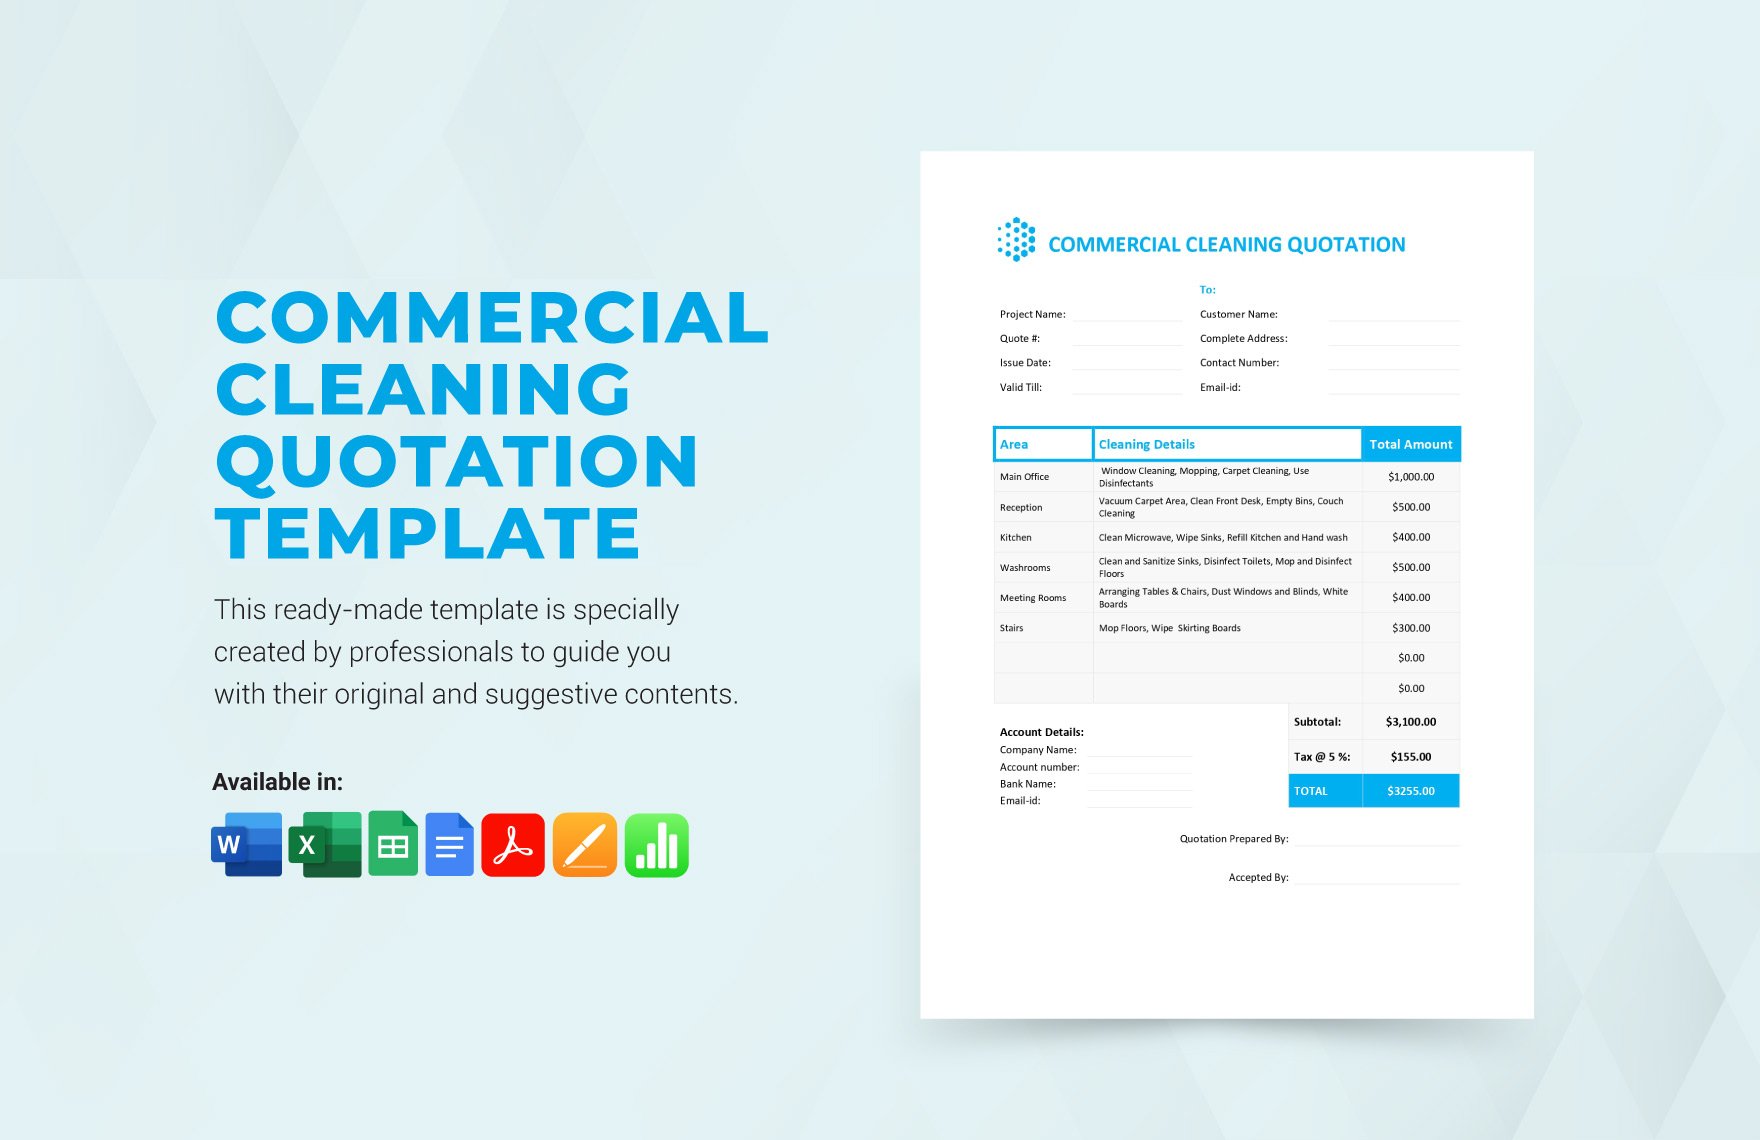 Commercial Cleaning Quotation Template